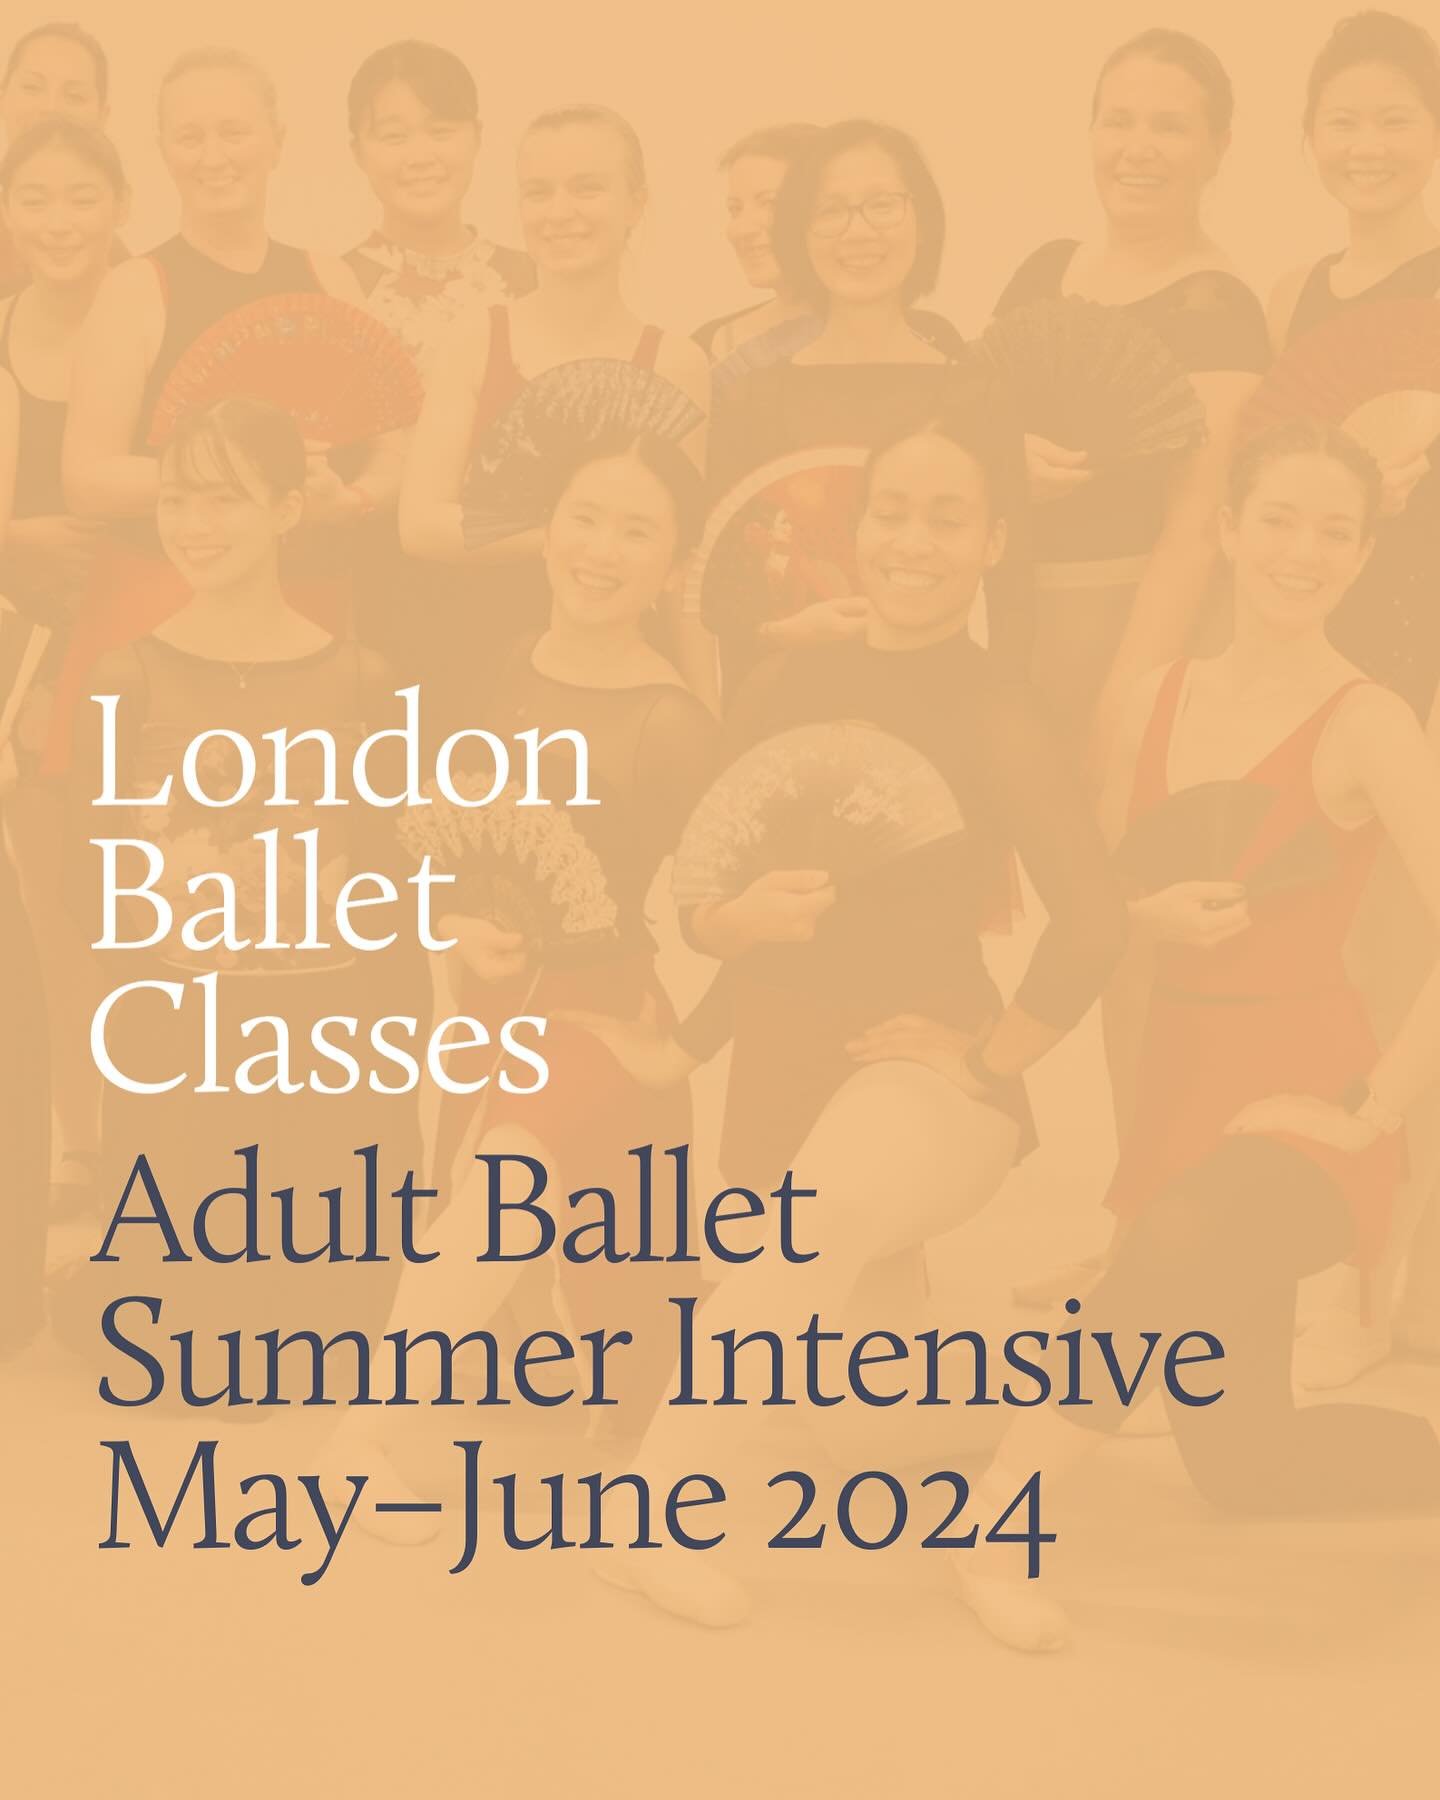 Announcing the lineup for our Adult Ballet Intensive! 

Fri 31 May - Sun 2 June 

🥳🤗🤩